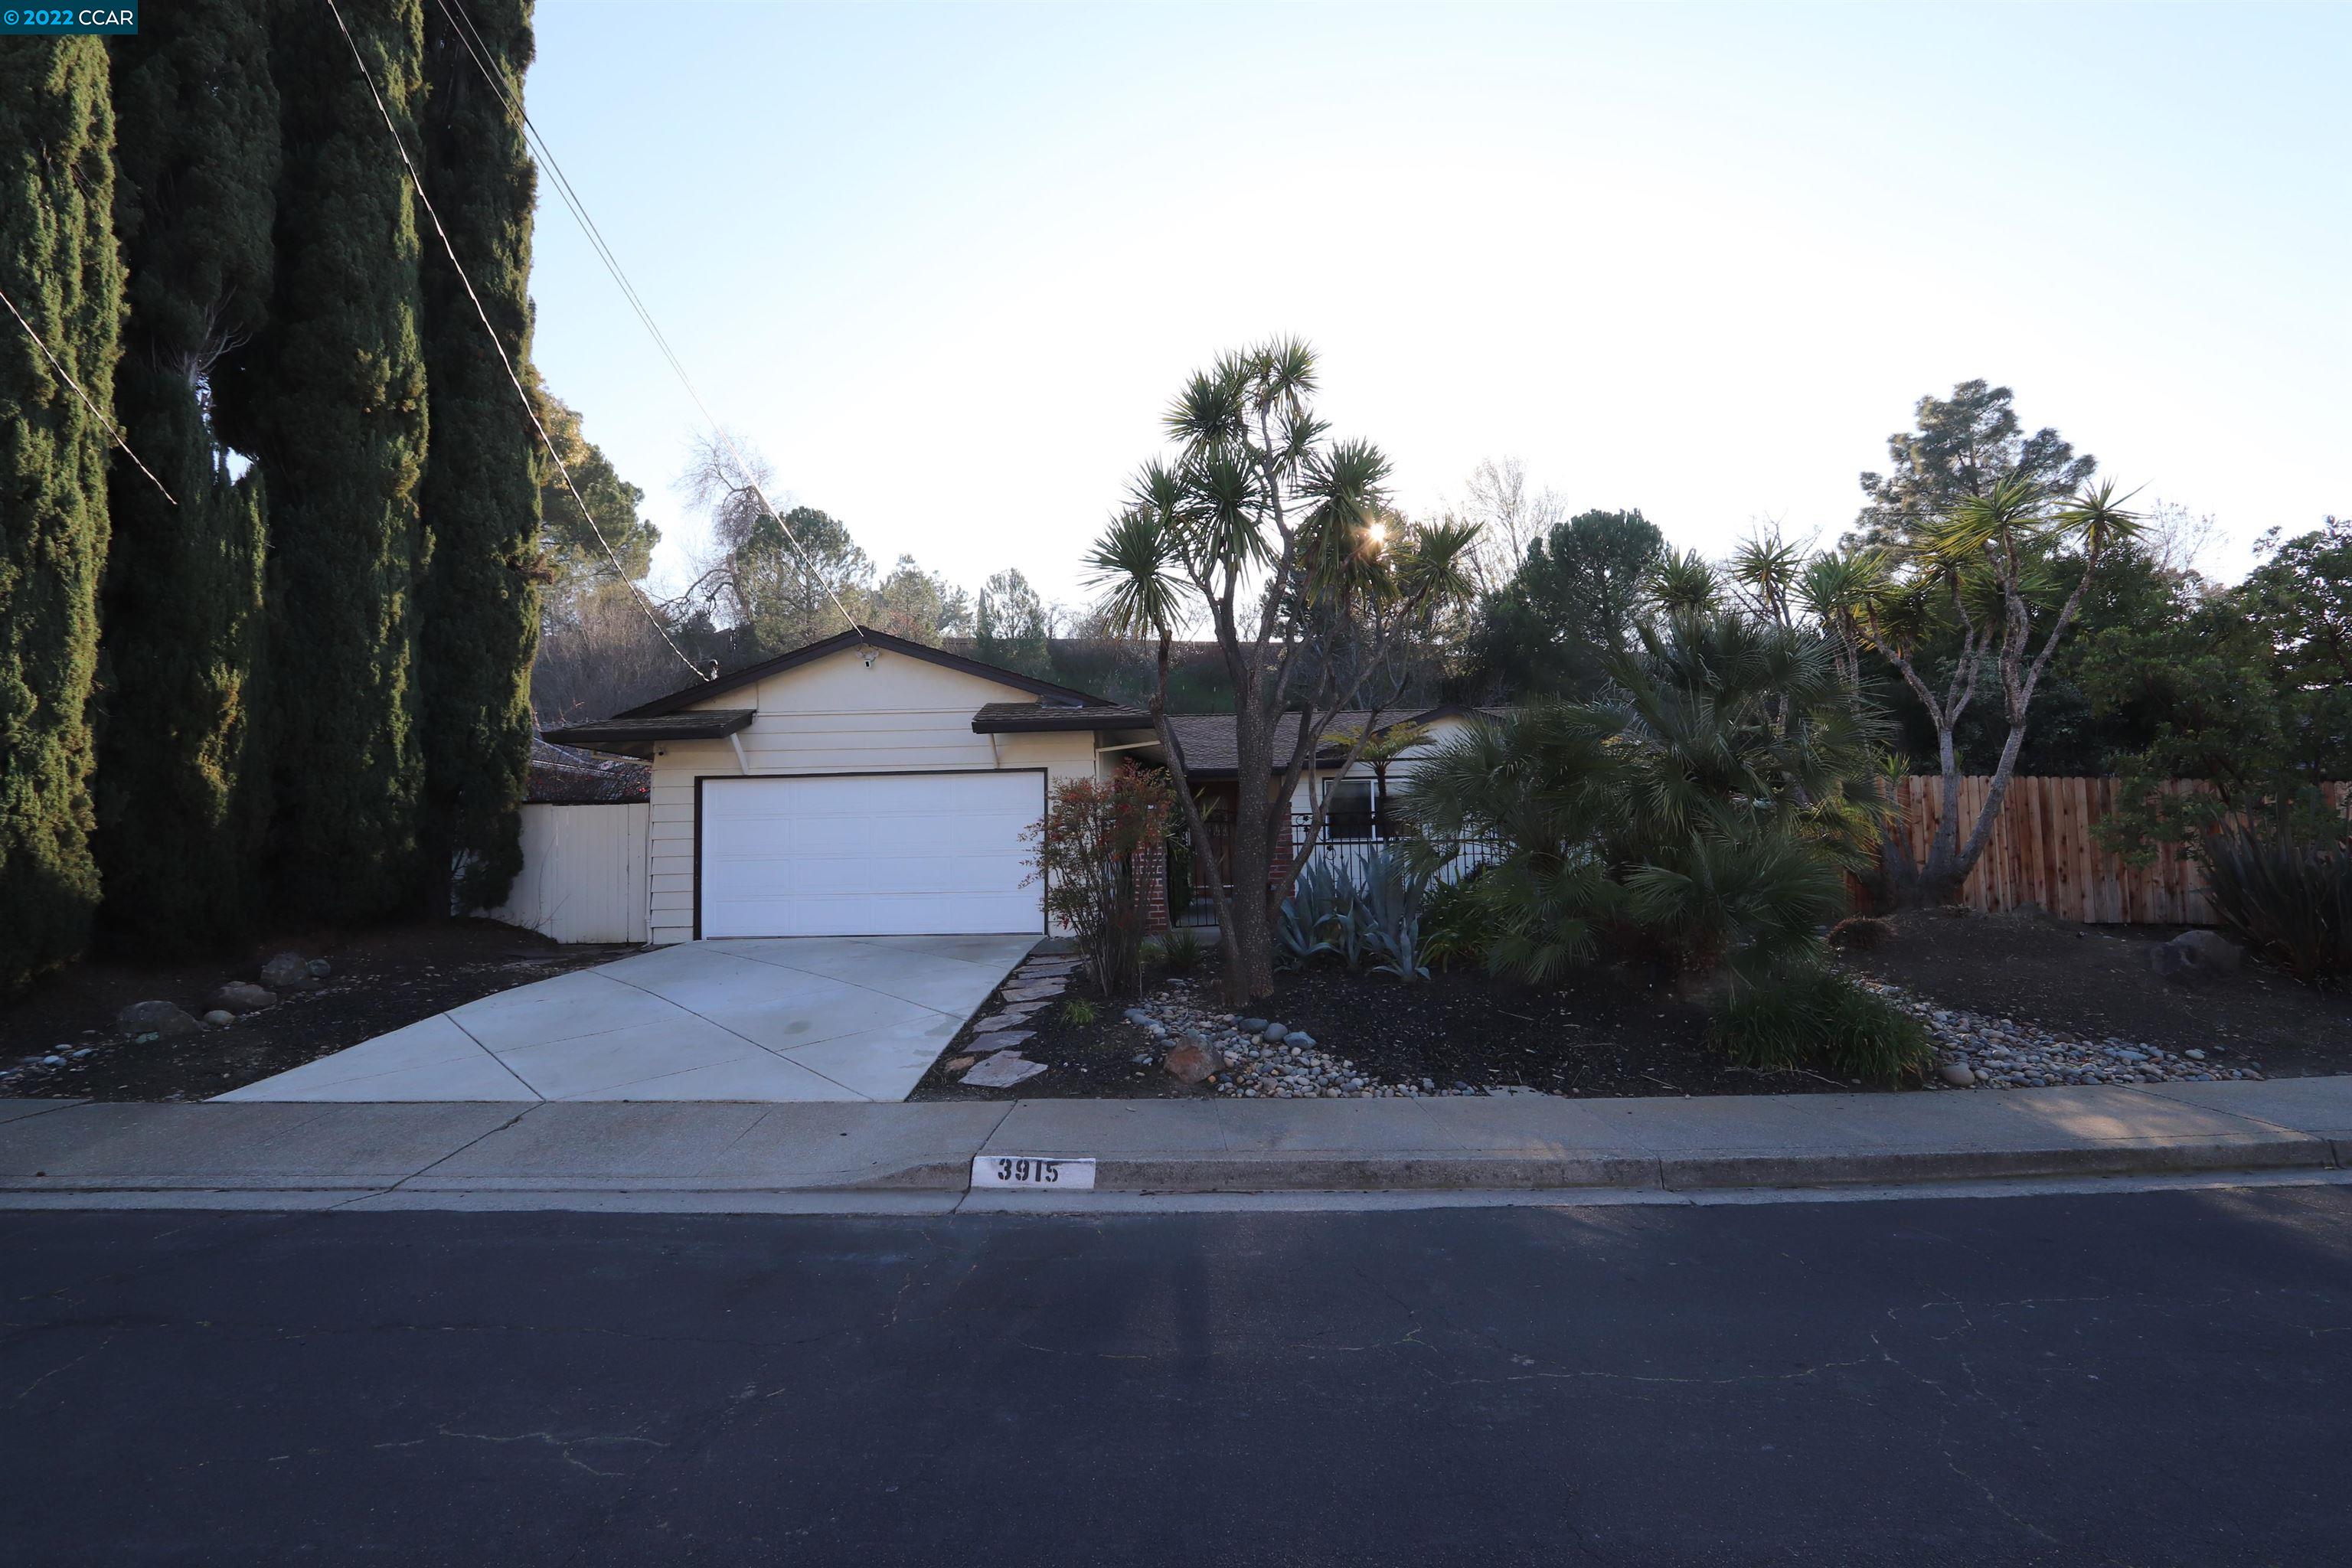 Photo of 3915 Bayview Cir in Concord, CA